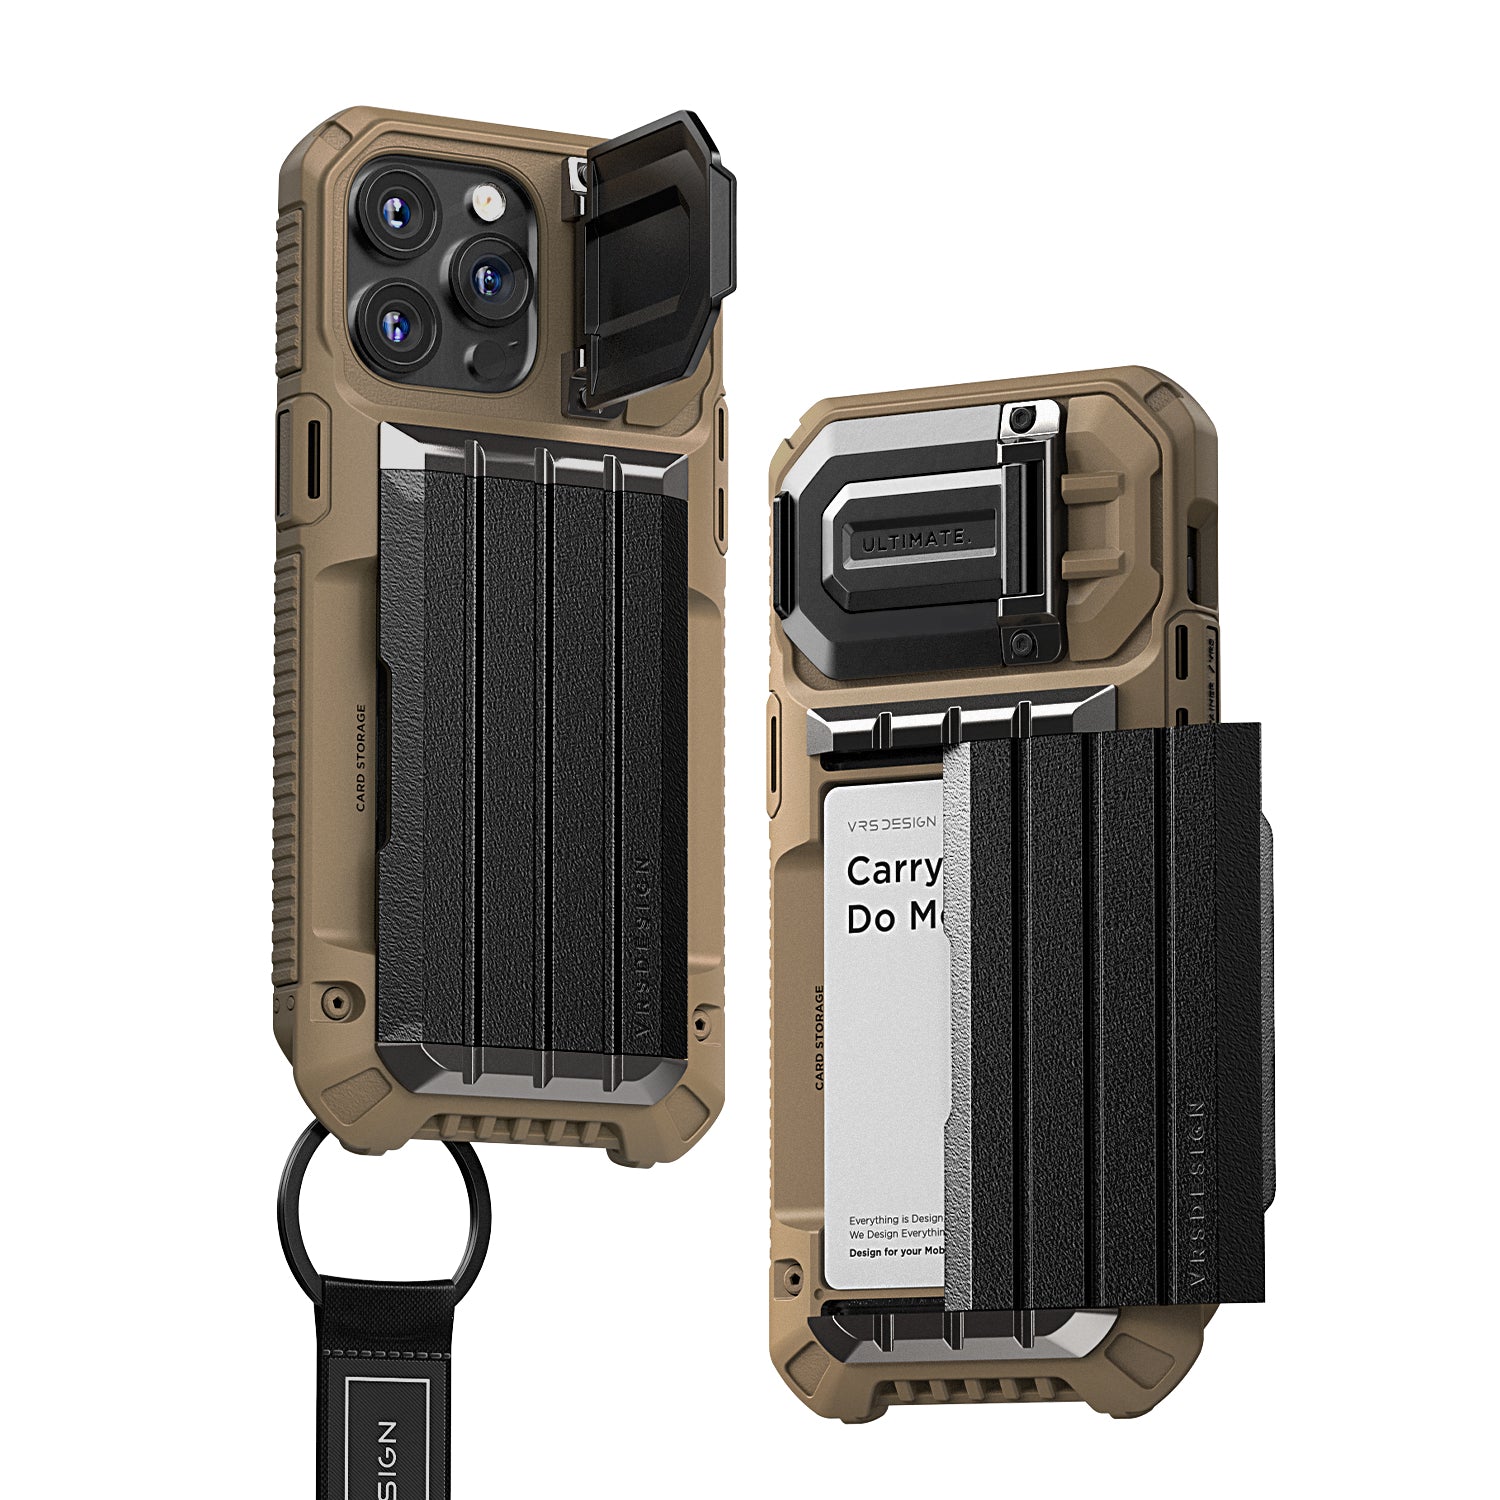 Rugged modern Apple iPhone 13 Pro Max case Glide Pro by VRS DESIGN